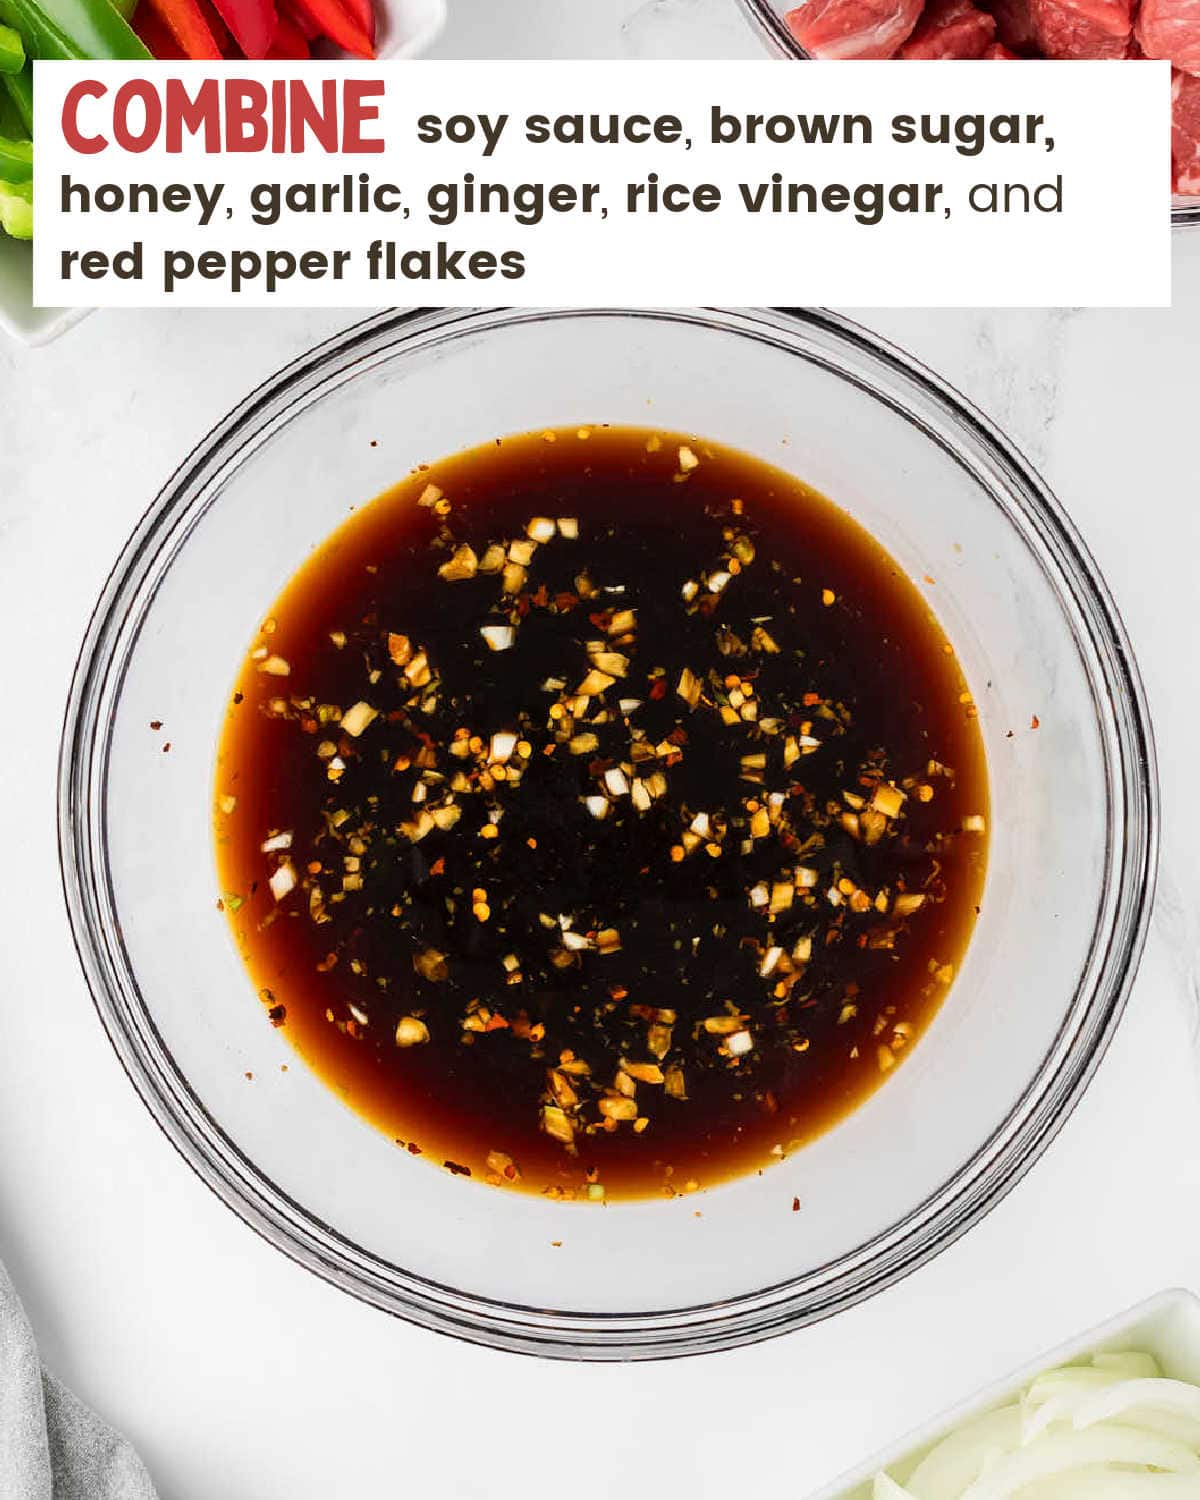 Soy sauce, brown sugar, honey, ginger, rice vinegar and other ingredients in a bowl.